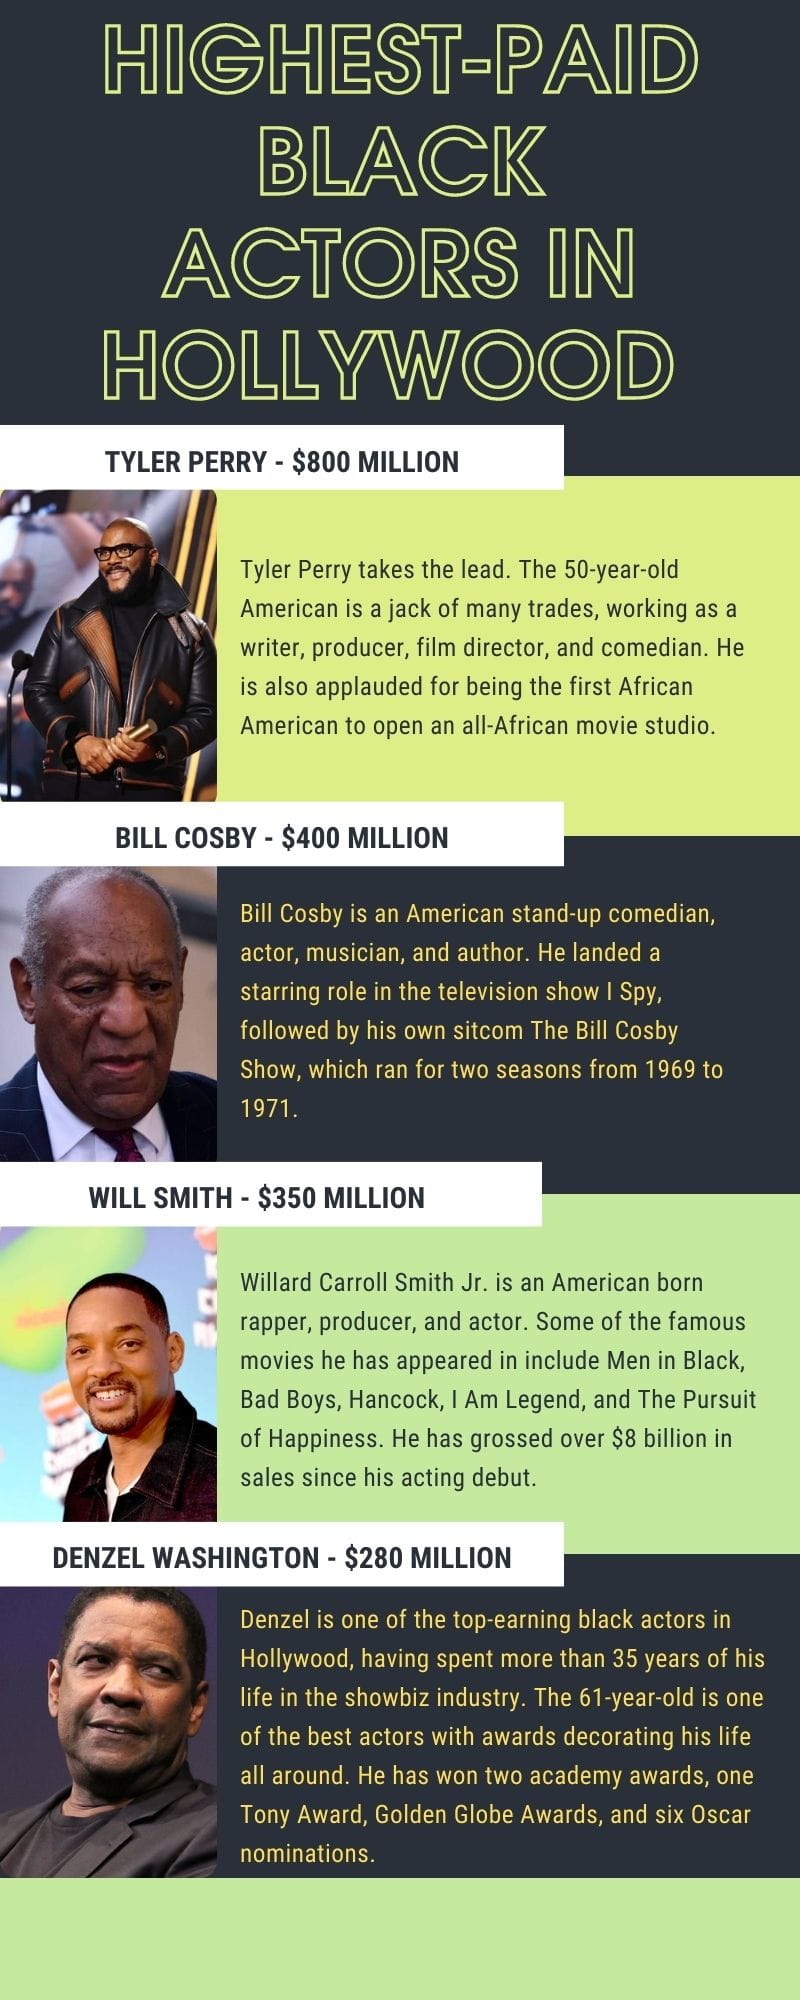 Highest-paid black actors in Hollywood